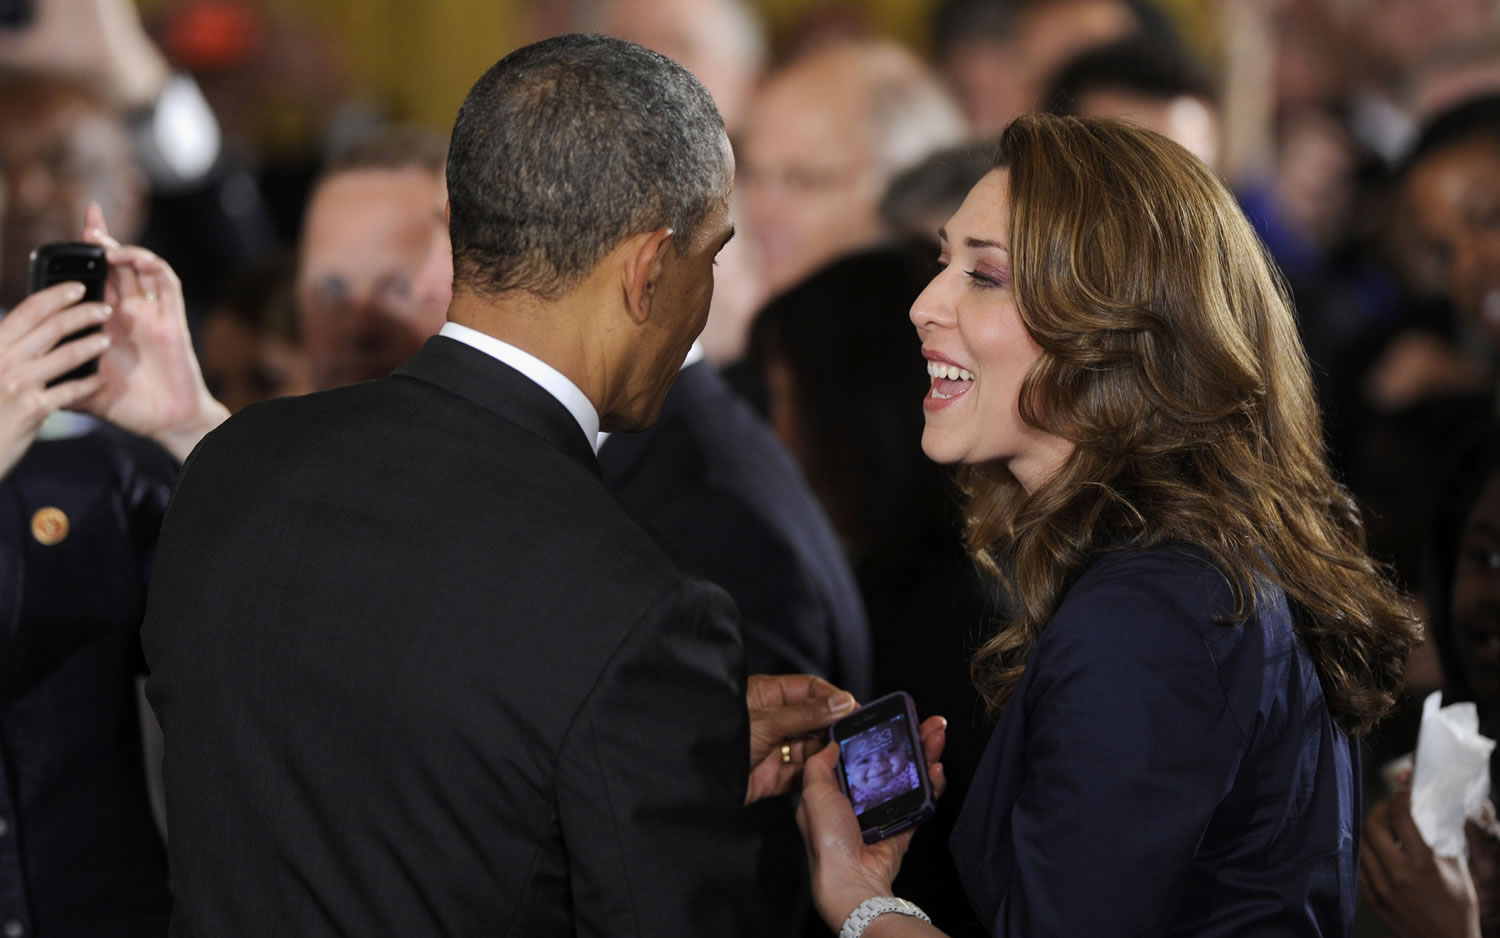 President Barack Obama talks today with Rep. Jaime Herrera Beutler, R-Camas, in the East Room of the White House in Washington after a ceremony where the president honored the NFL Super Bowl champion Seattle Seahawks football team.